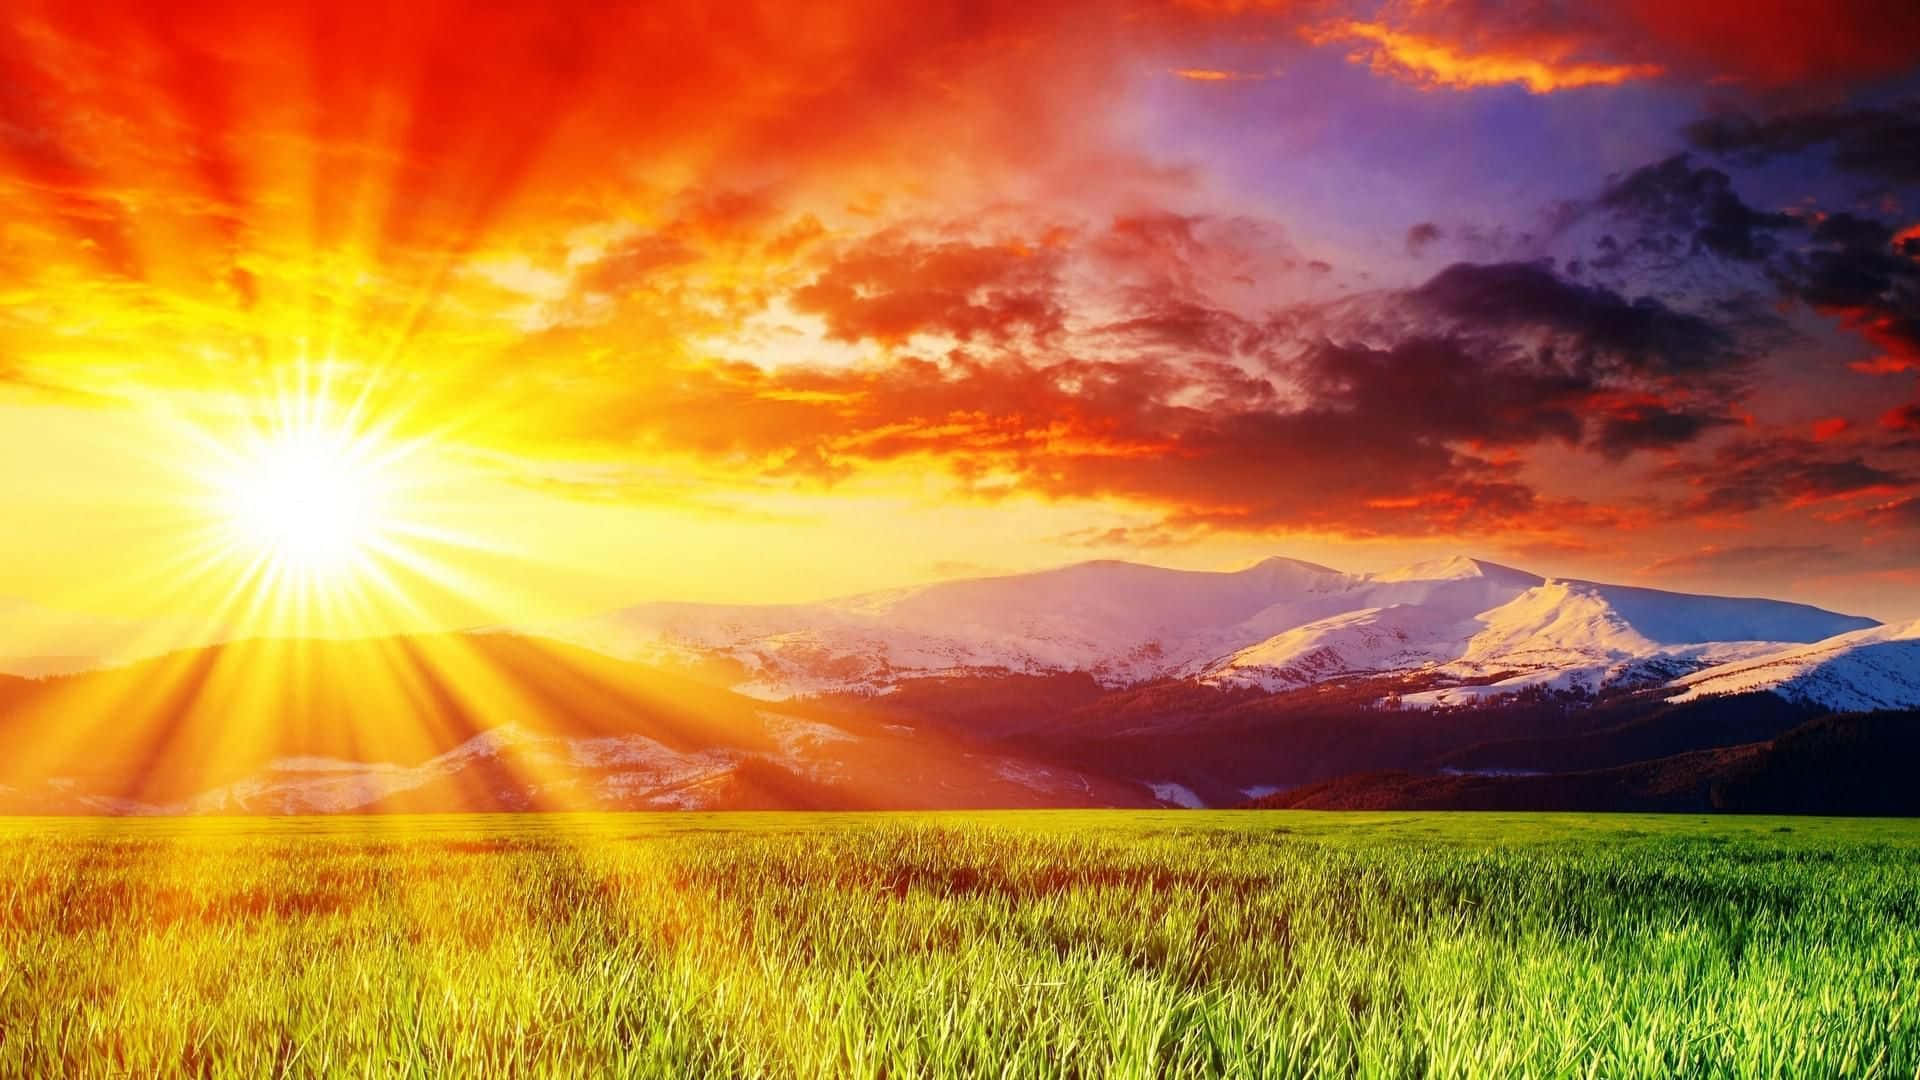 A Colorful Sun Rising Over A Green Field Wallpaper